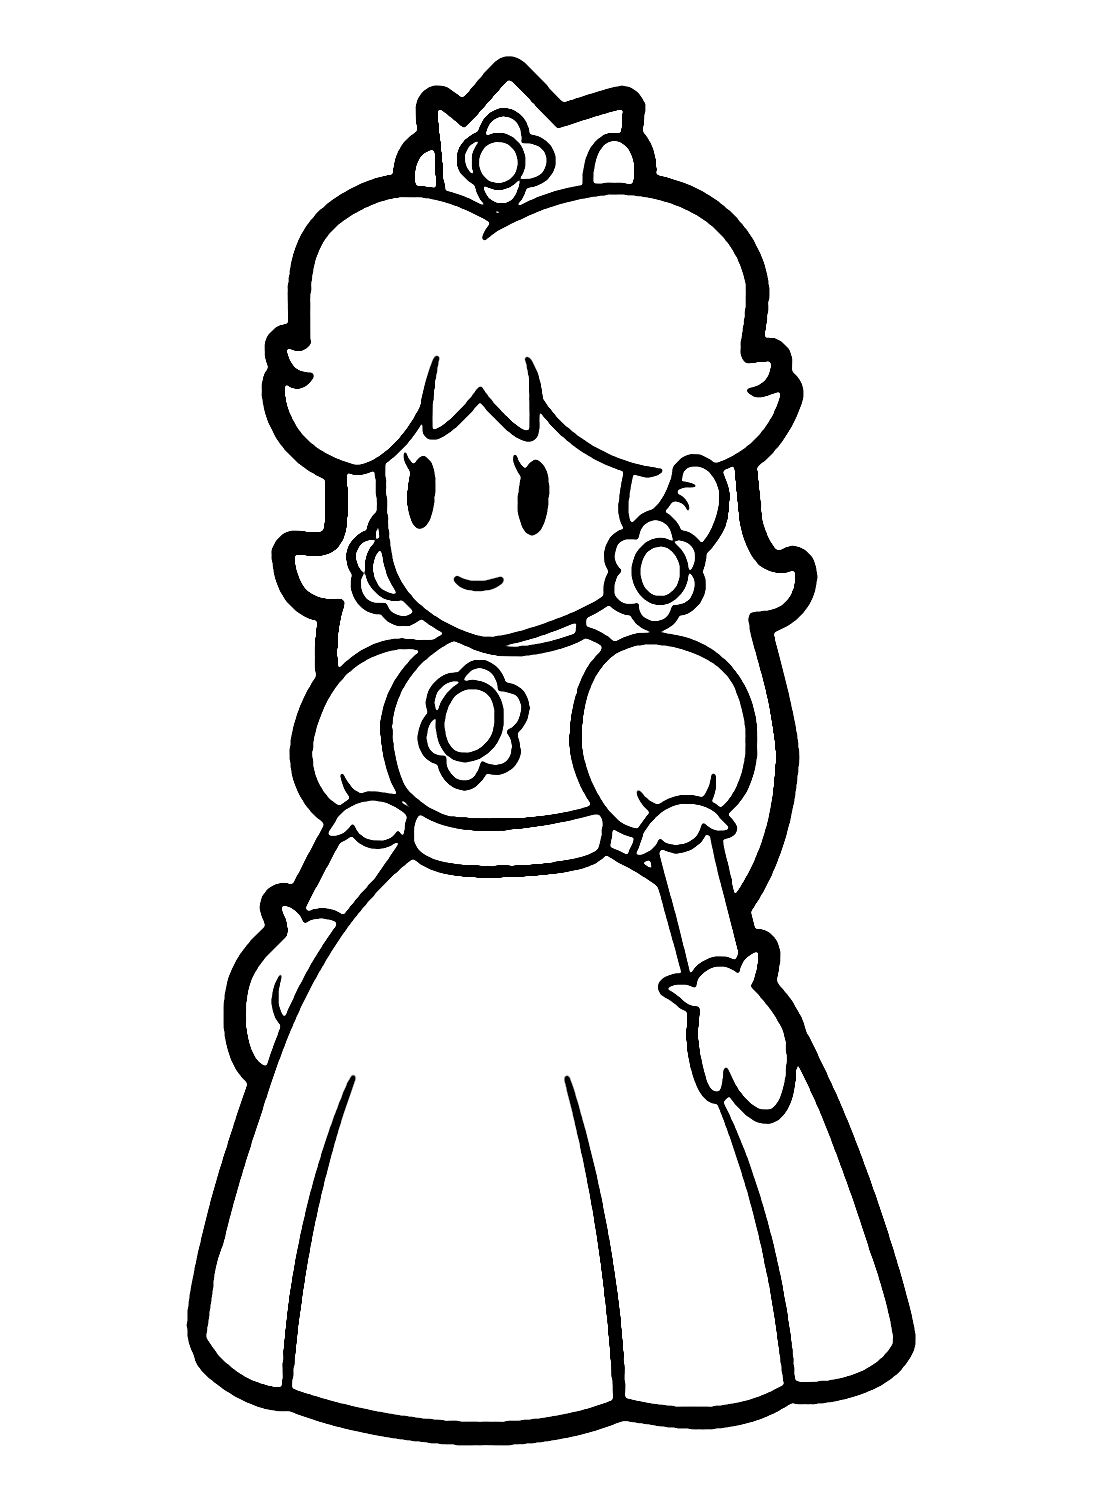 Mario Super Daisy Coloring Pages